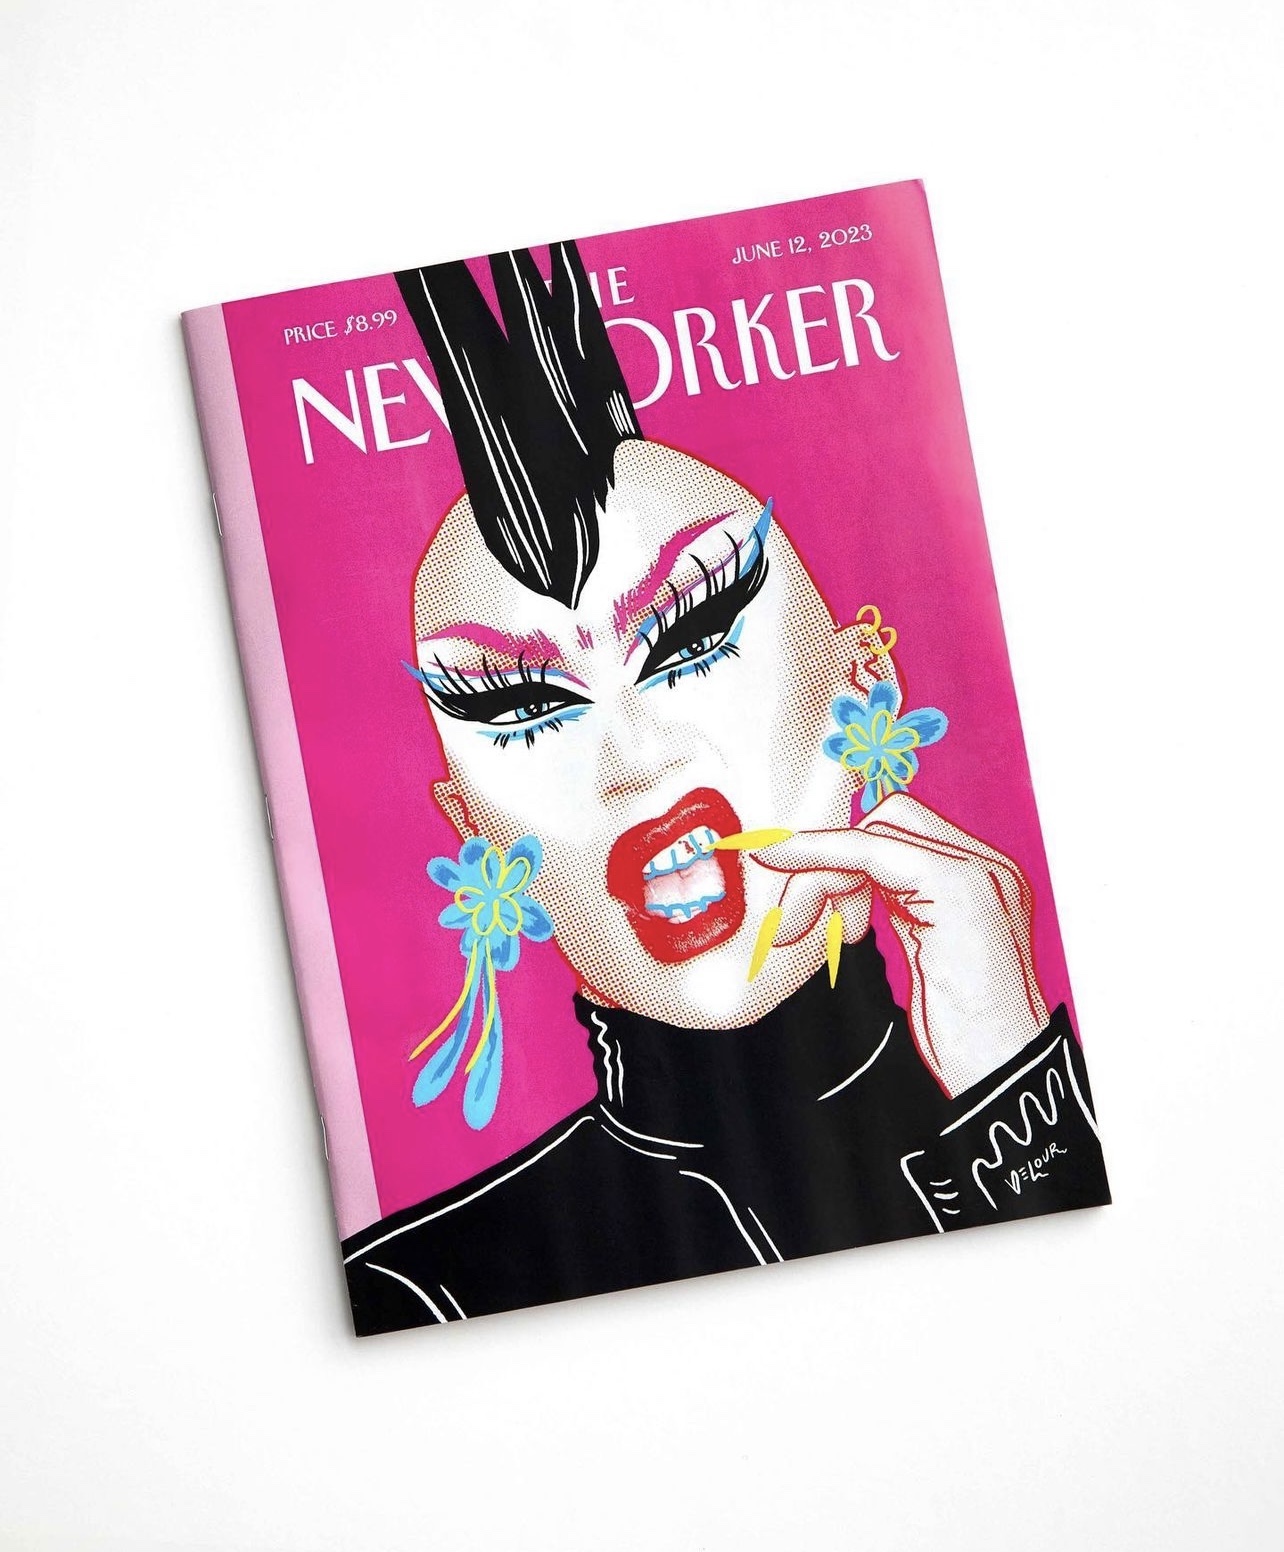 The recent cover of the New Yorker featuring art of Sasha Velour, an bald drag queen with a black mohawk. Velour is wearing a black high neck jacket, has bright red lips, pink eyebrows, exaggerated black eyeliner, and large turquoise earrings. Her pinky is touching her teeth. The background of the cover is hot pink.